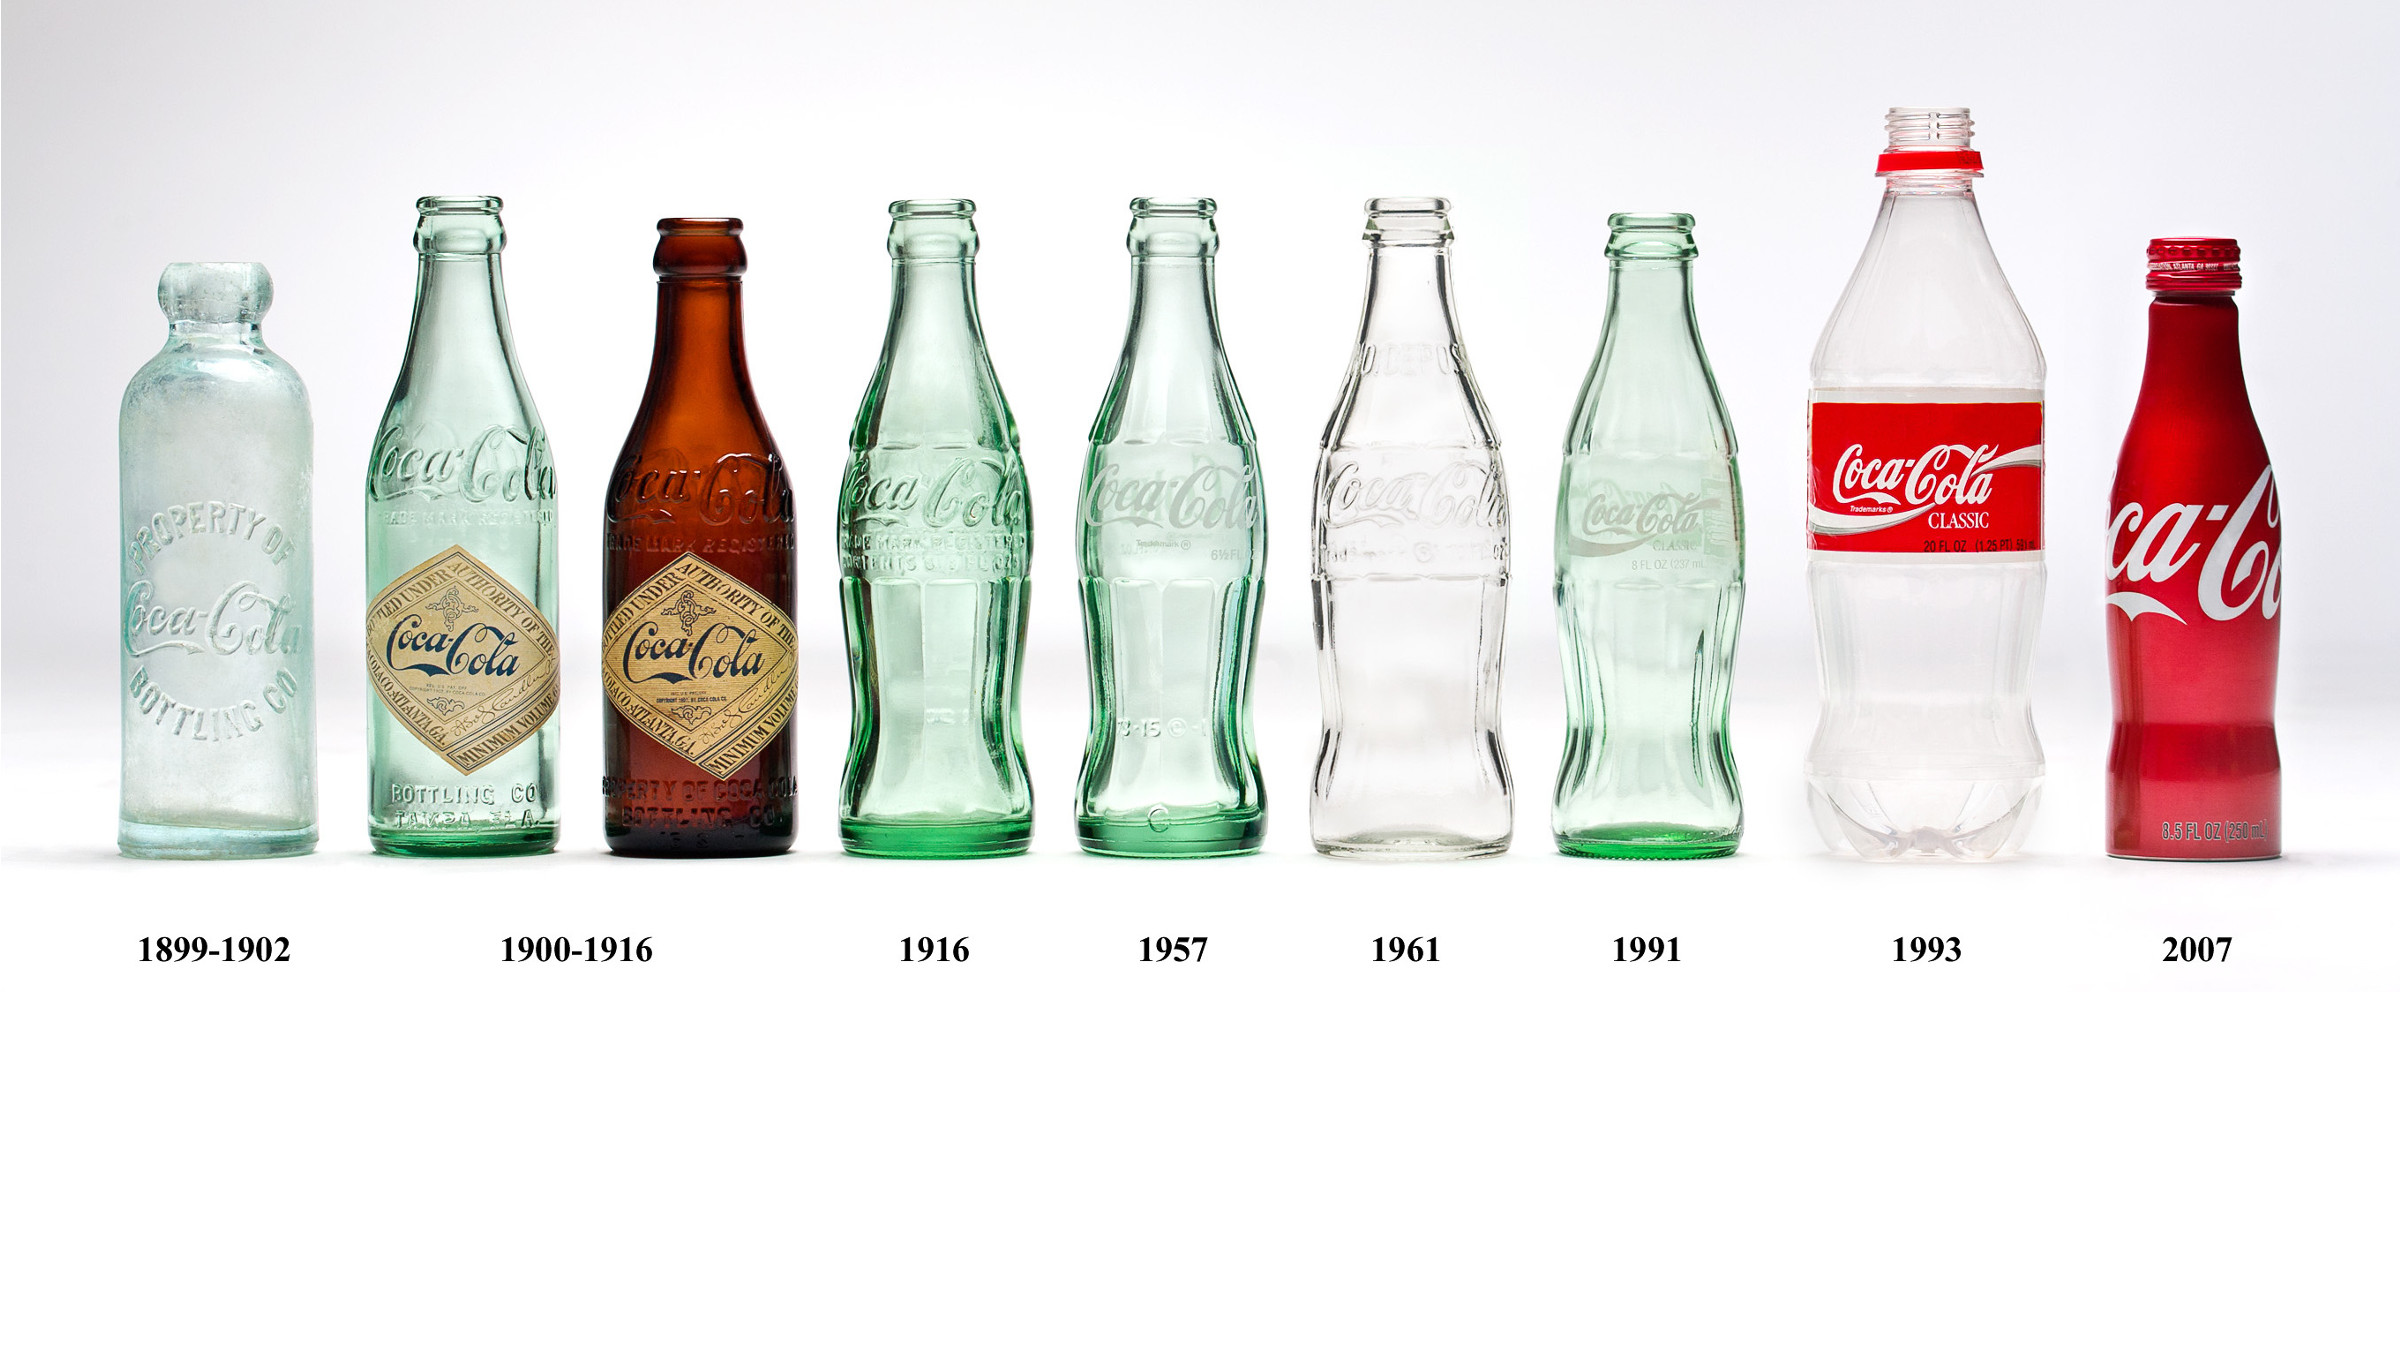 The Evolution of the CocaCola Bottle